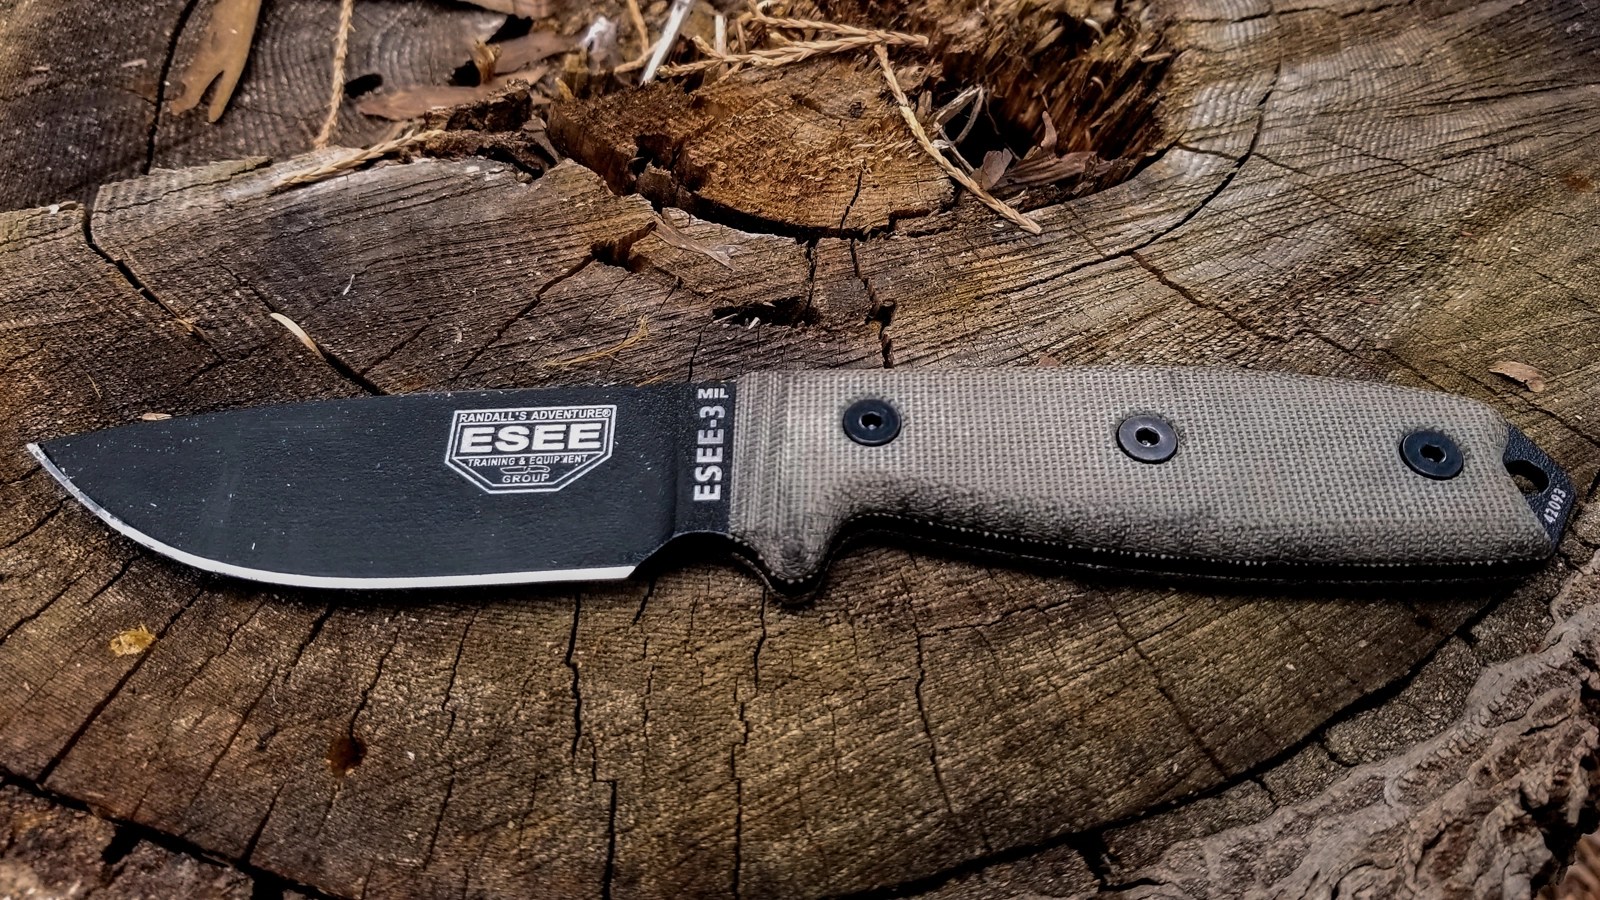 ESEE 3 MIL Fixed Blade: Practical And Fully Capable